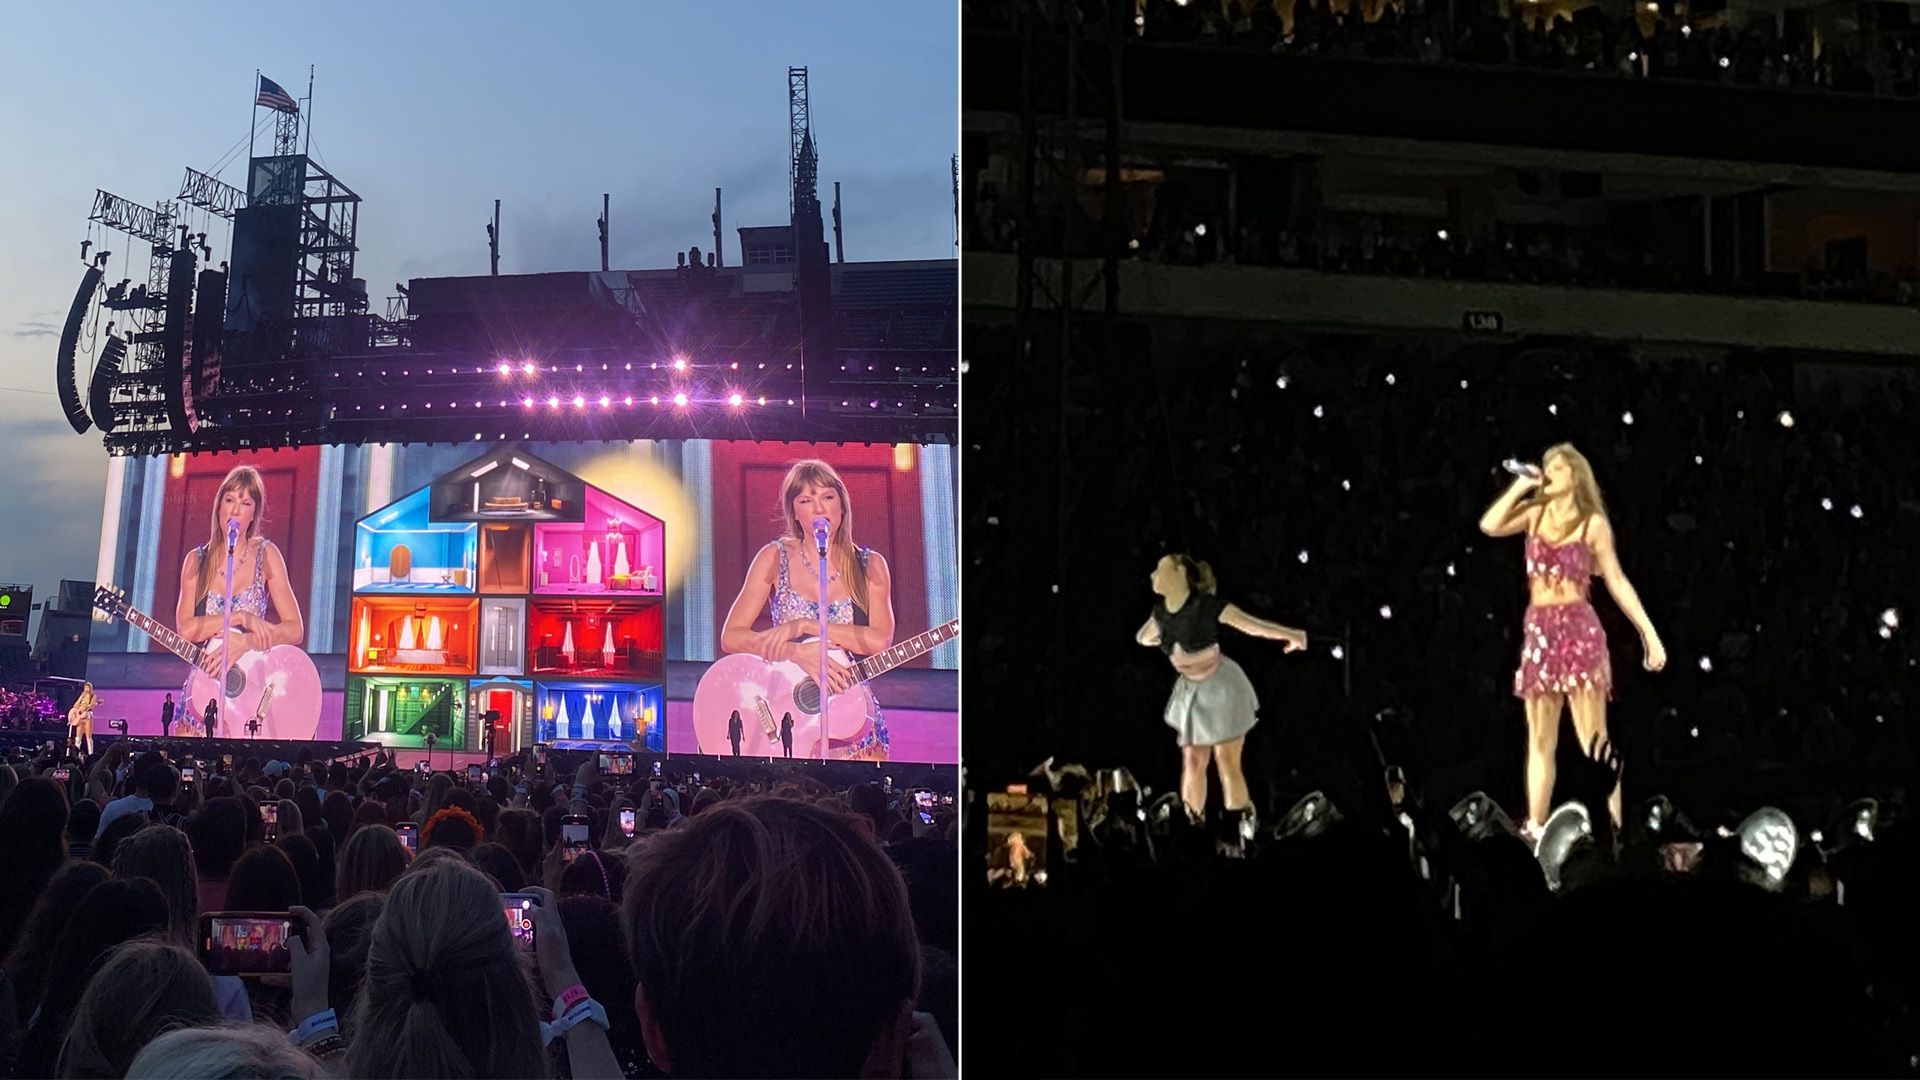 Images of Taylor Swift performing in Philadelphia